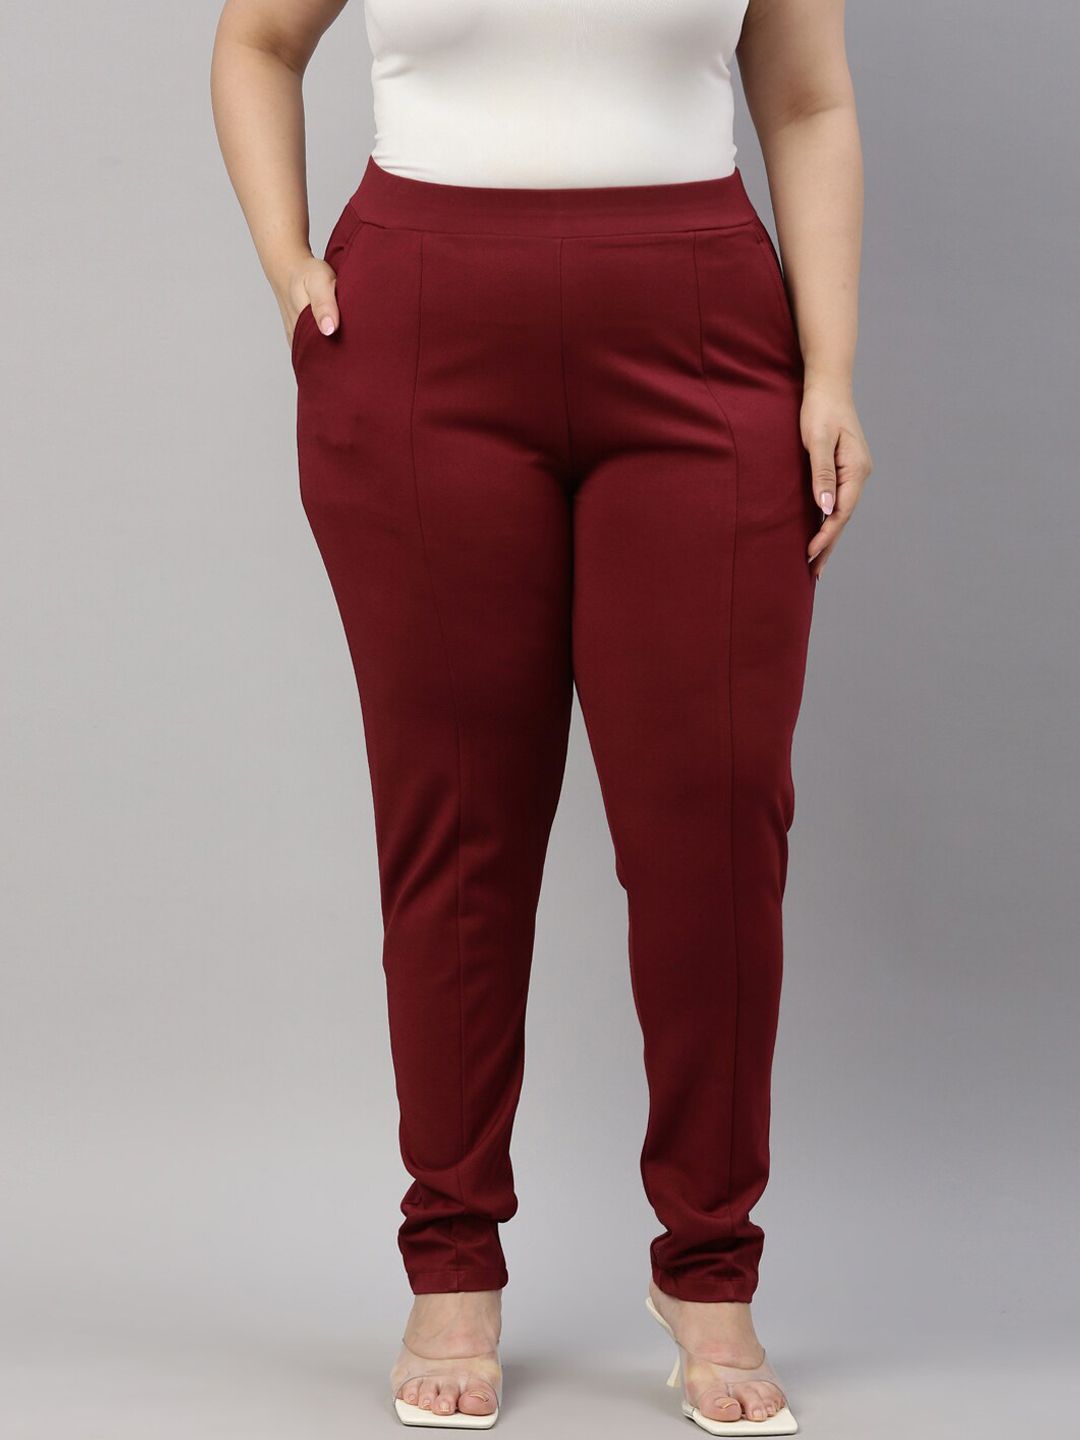 Go Colors Women Maroon Slim Fit Trousers Price in India